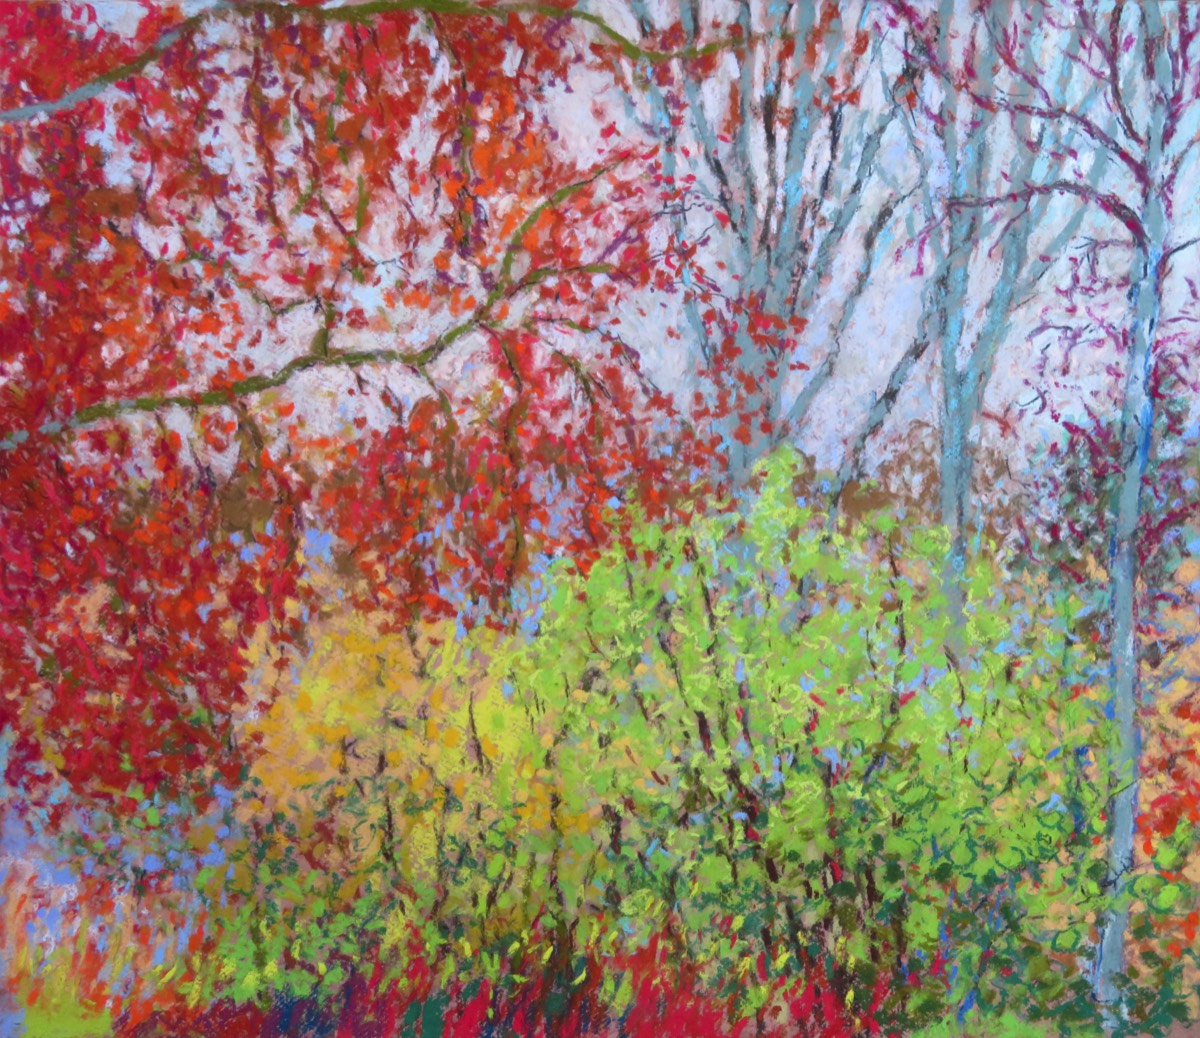 Fronds of the modest Beech, Hazels and the immodest Ash and Poplars - Pastel 17.25 X 20 inches - Created 27th November 2020